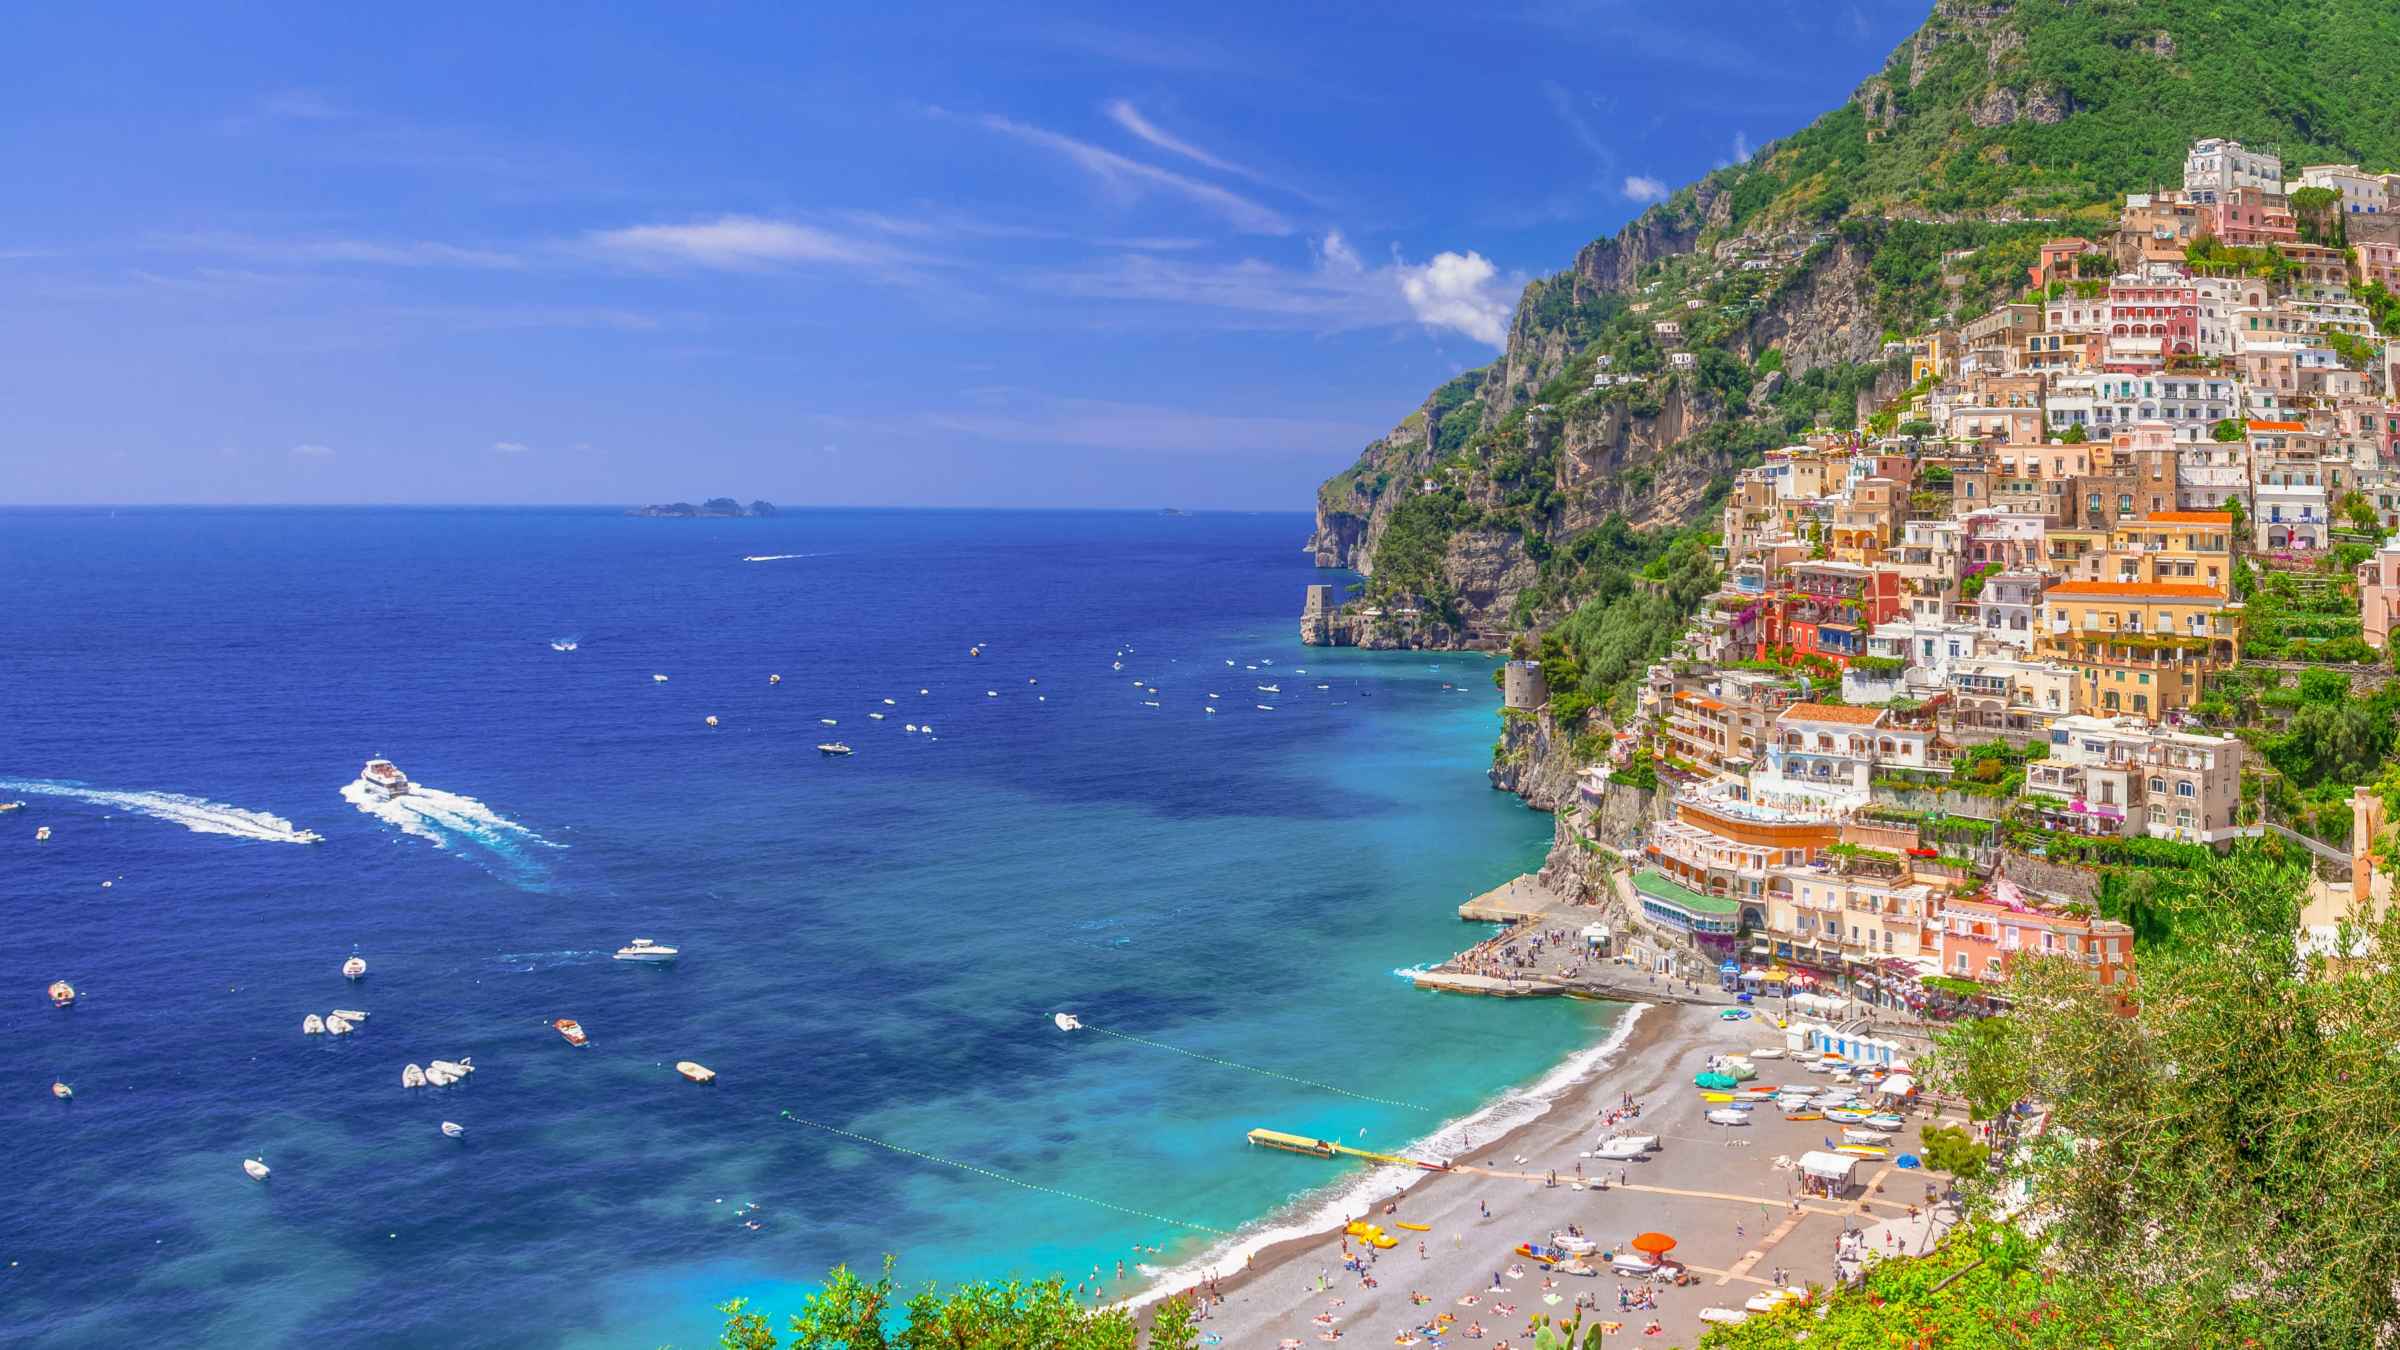 Amalfi Coast 2021: Top 10 Tours & Activities (with Photos) - Things to ...